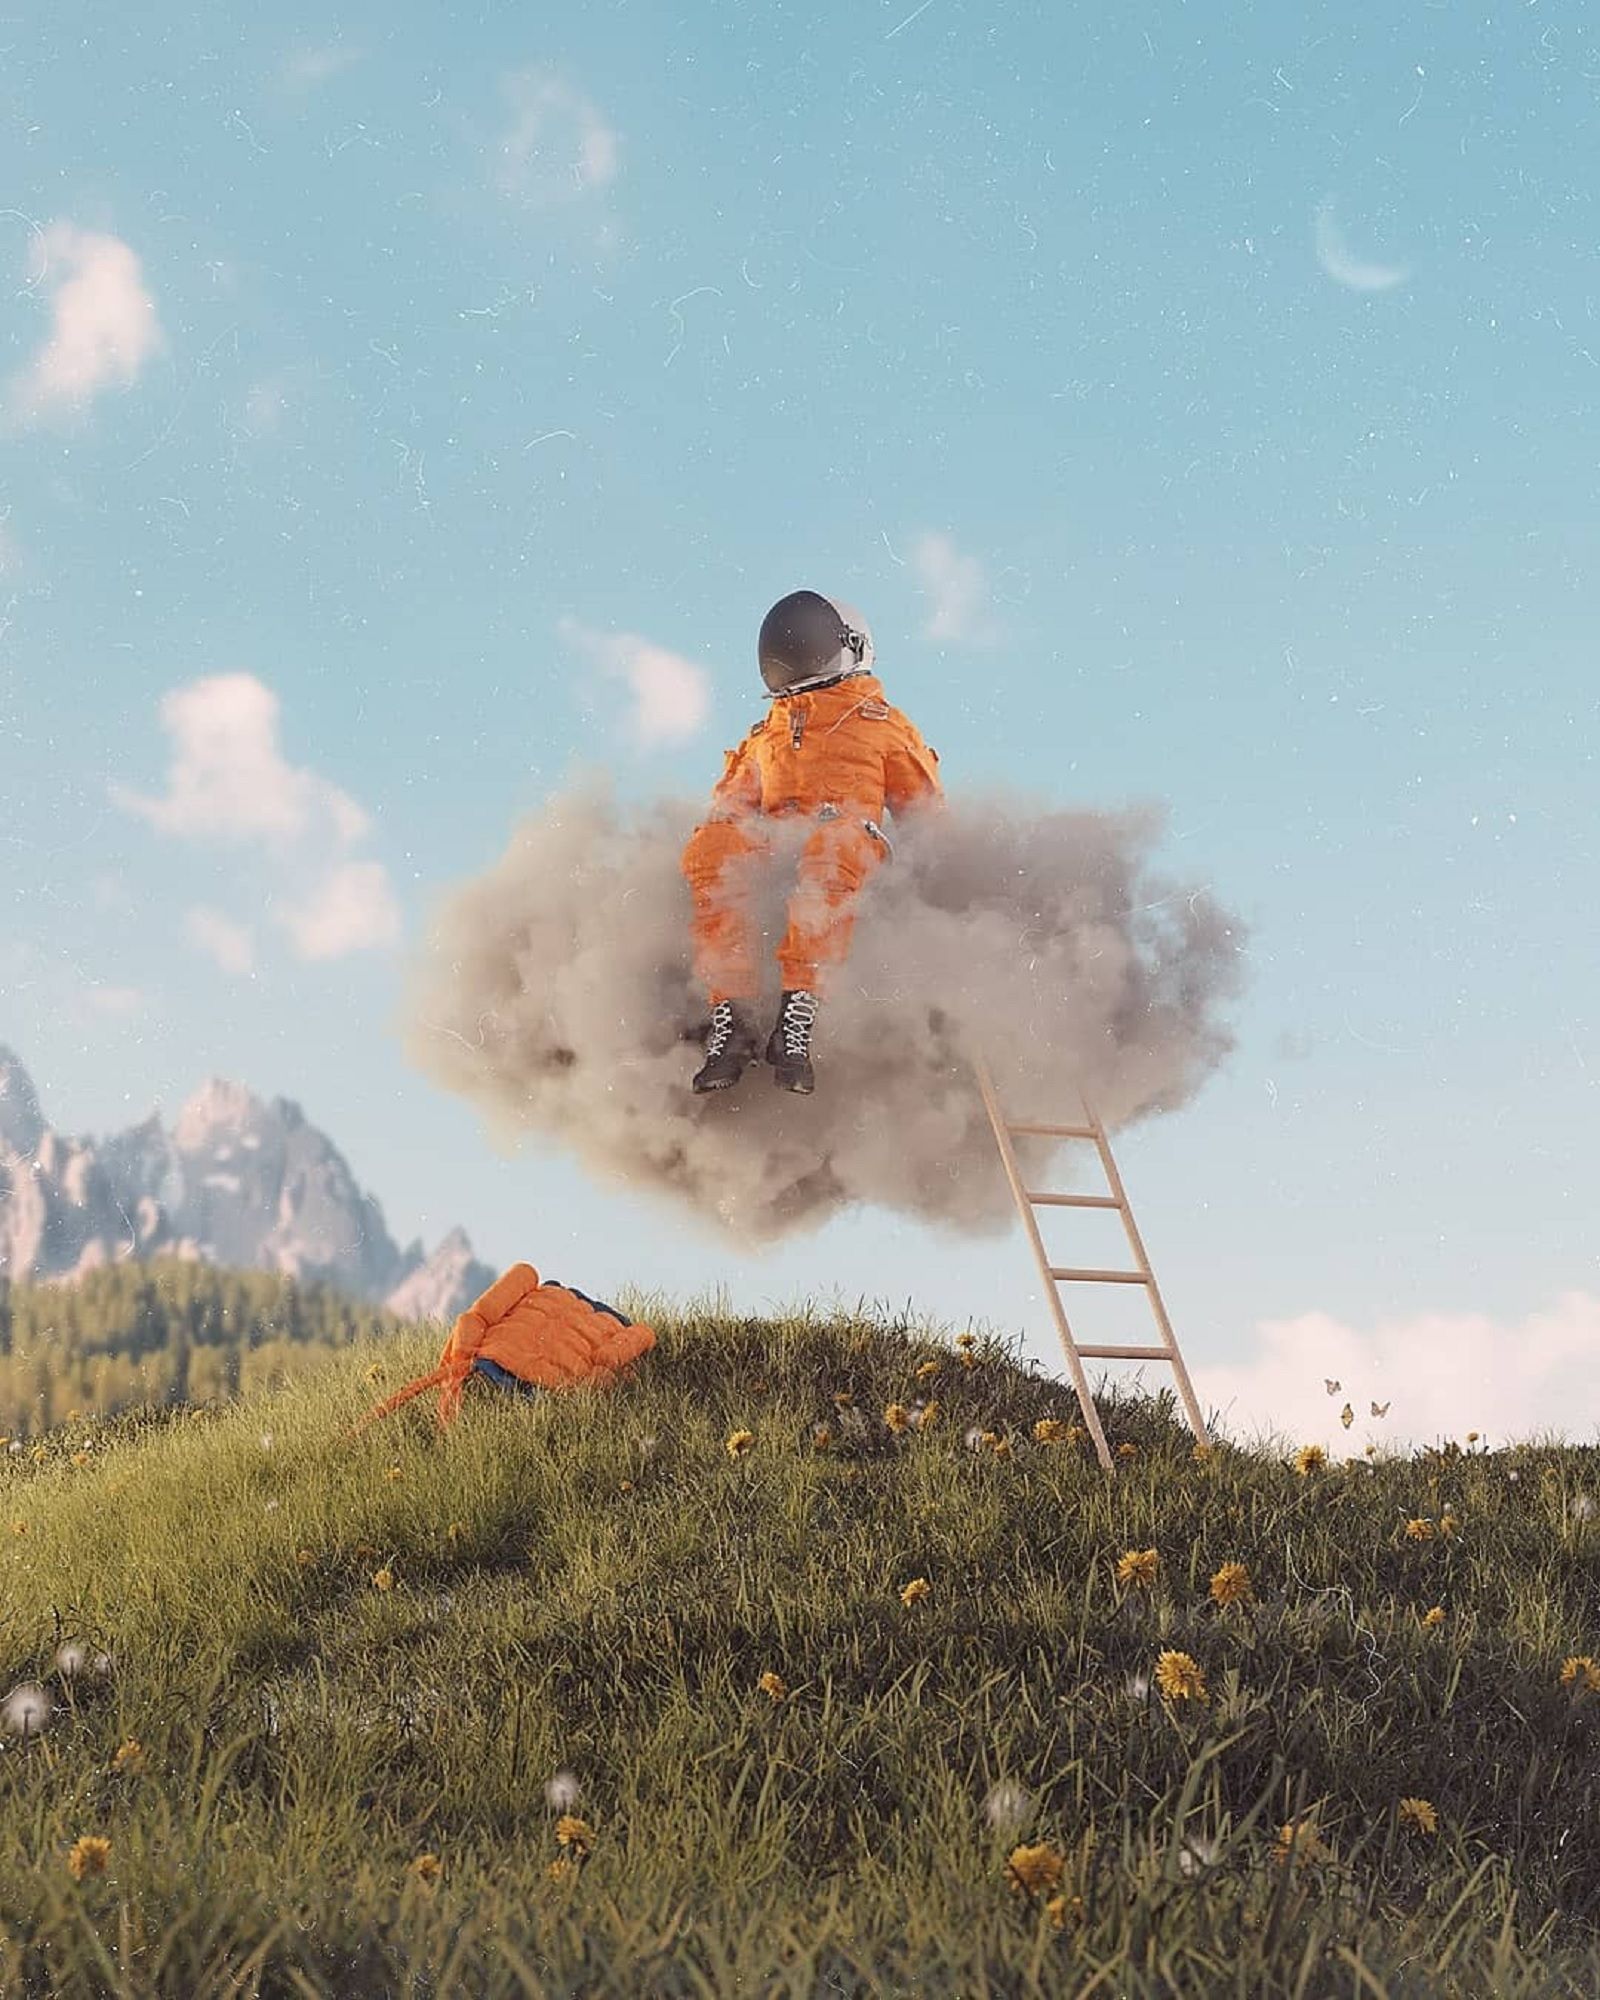 the finest surreal photographers and image manipulators of instagram photo 29